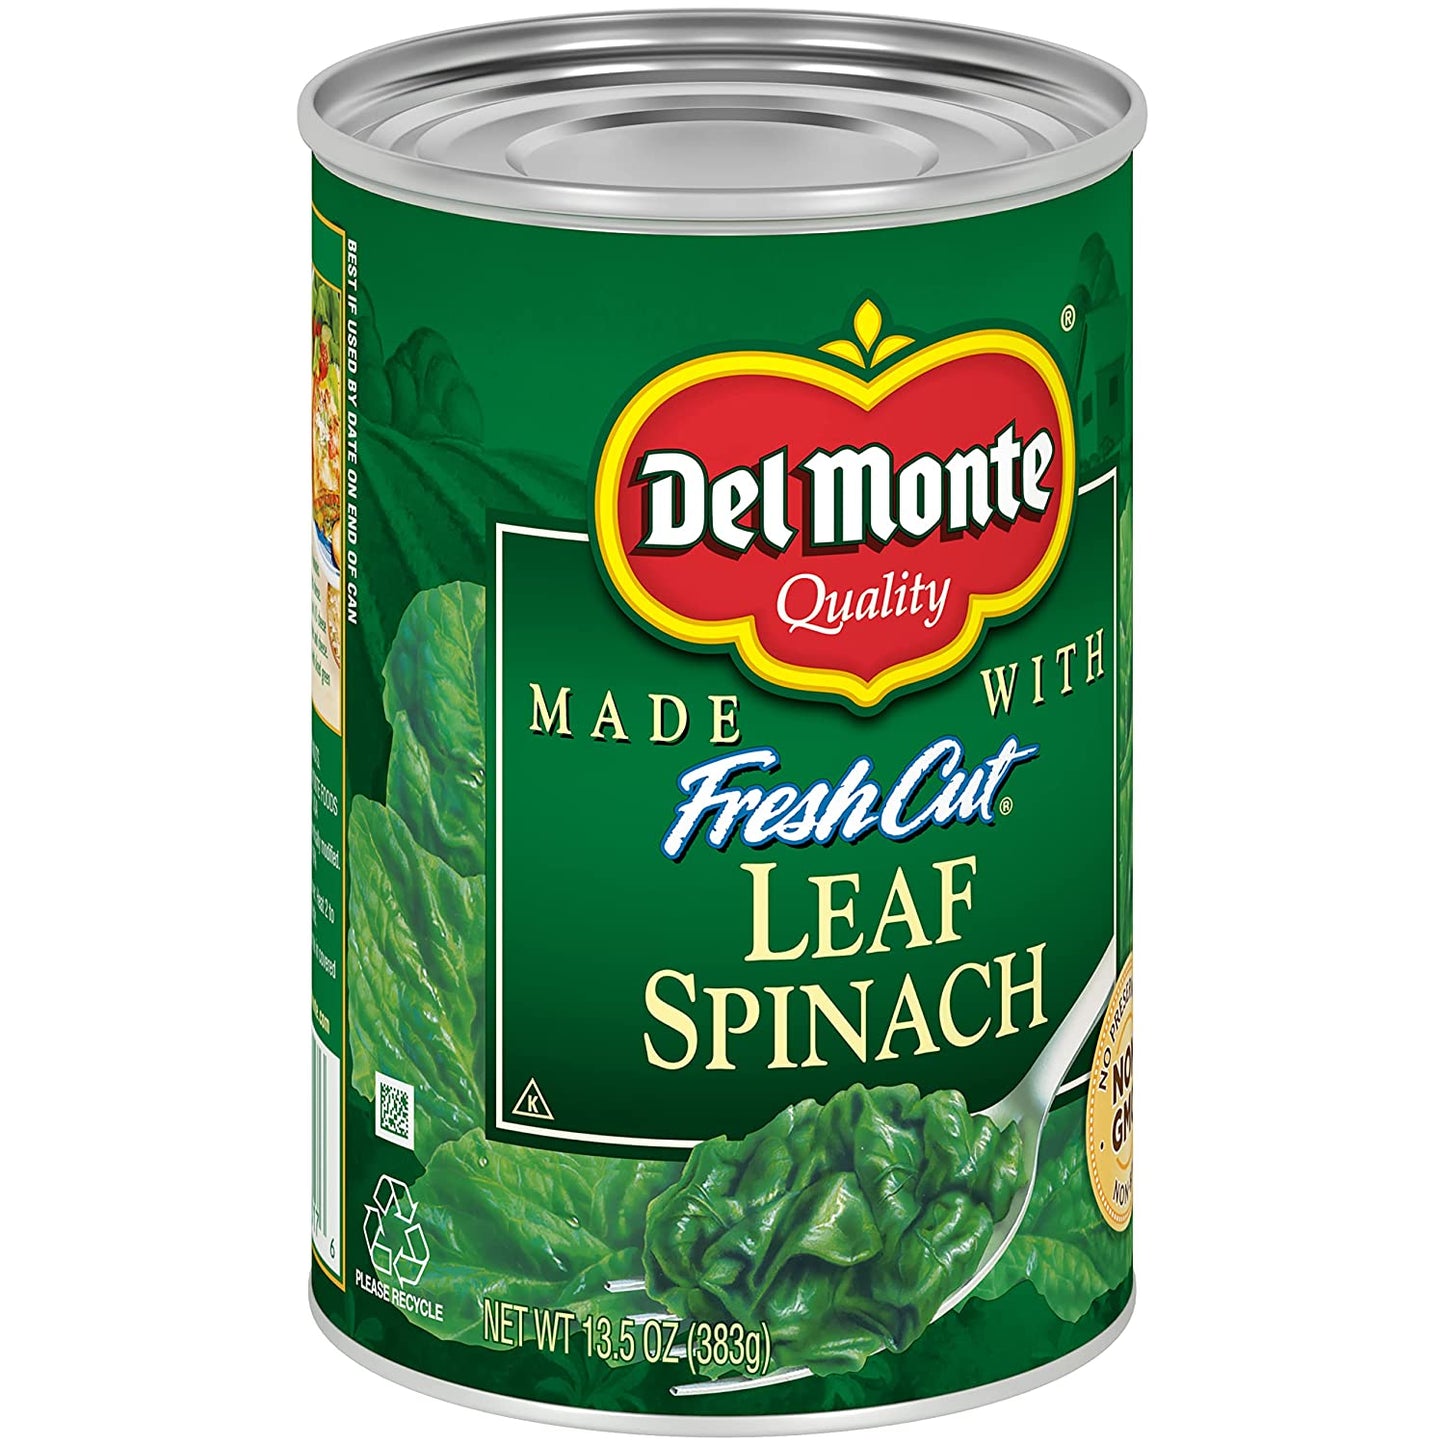 del monte canned fresh cut leaf spinach, 13.5 ounce (pack of 12)